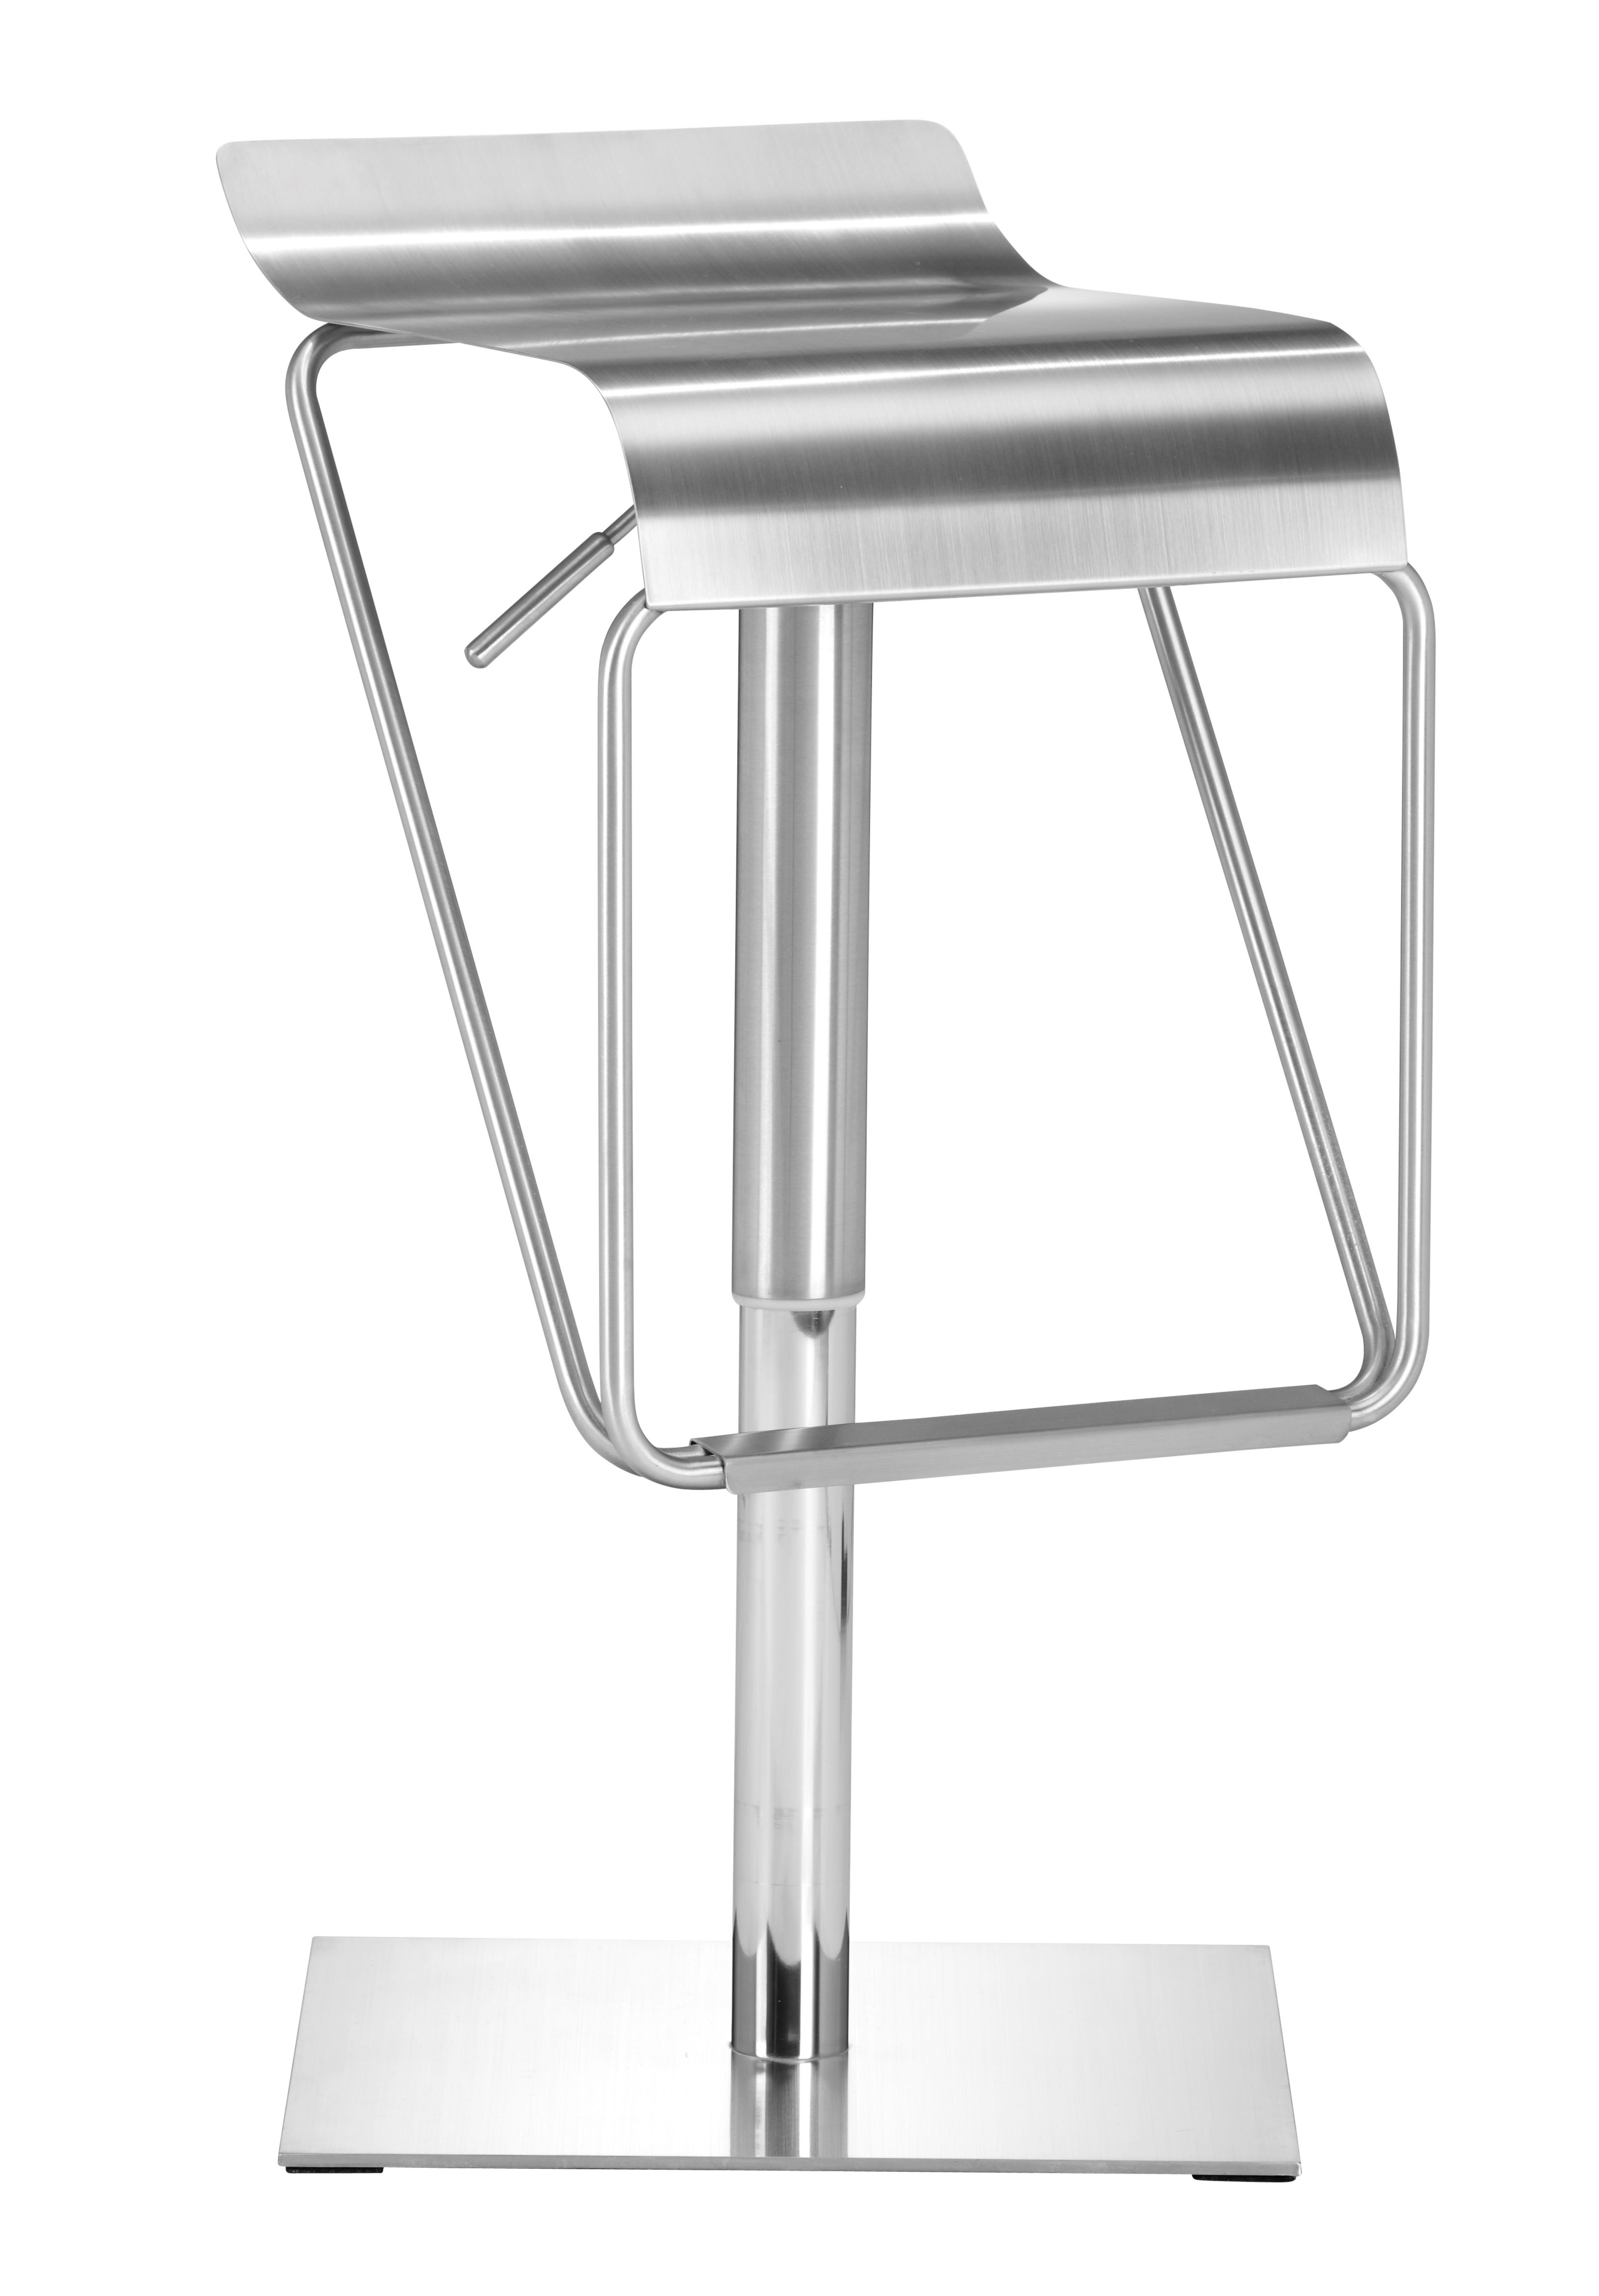 Stainless steel bar chairs